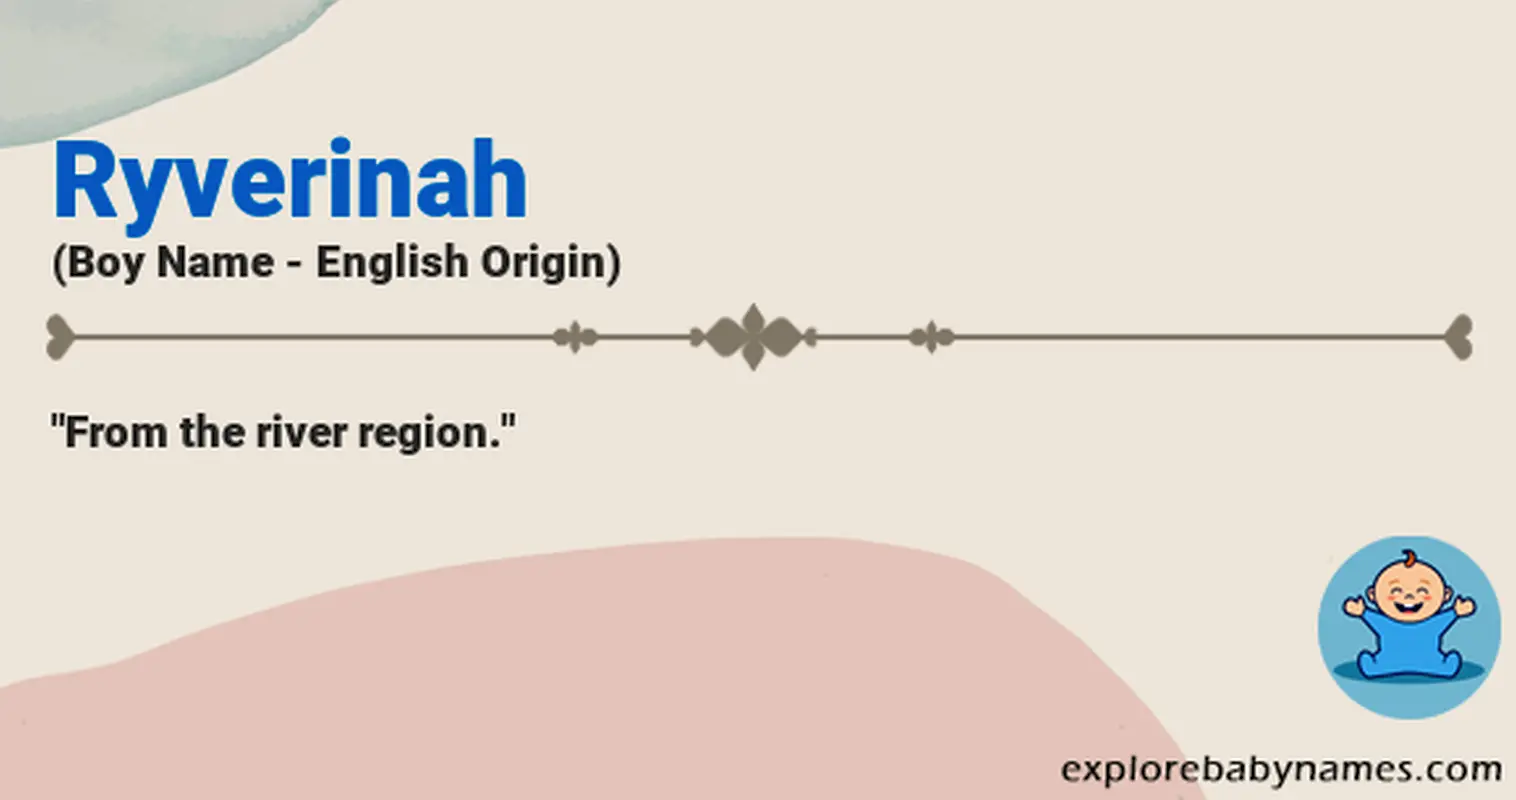 Meaning of Ryverinah